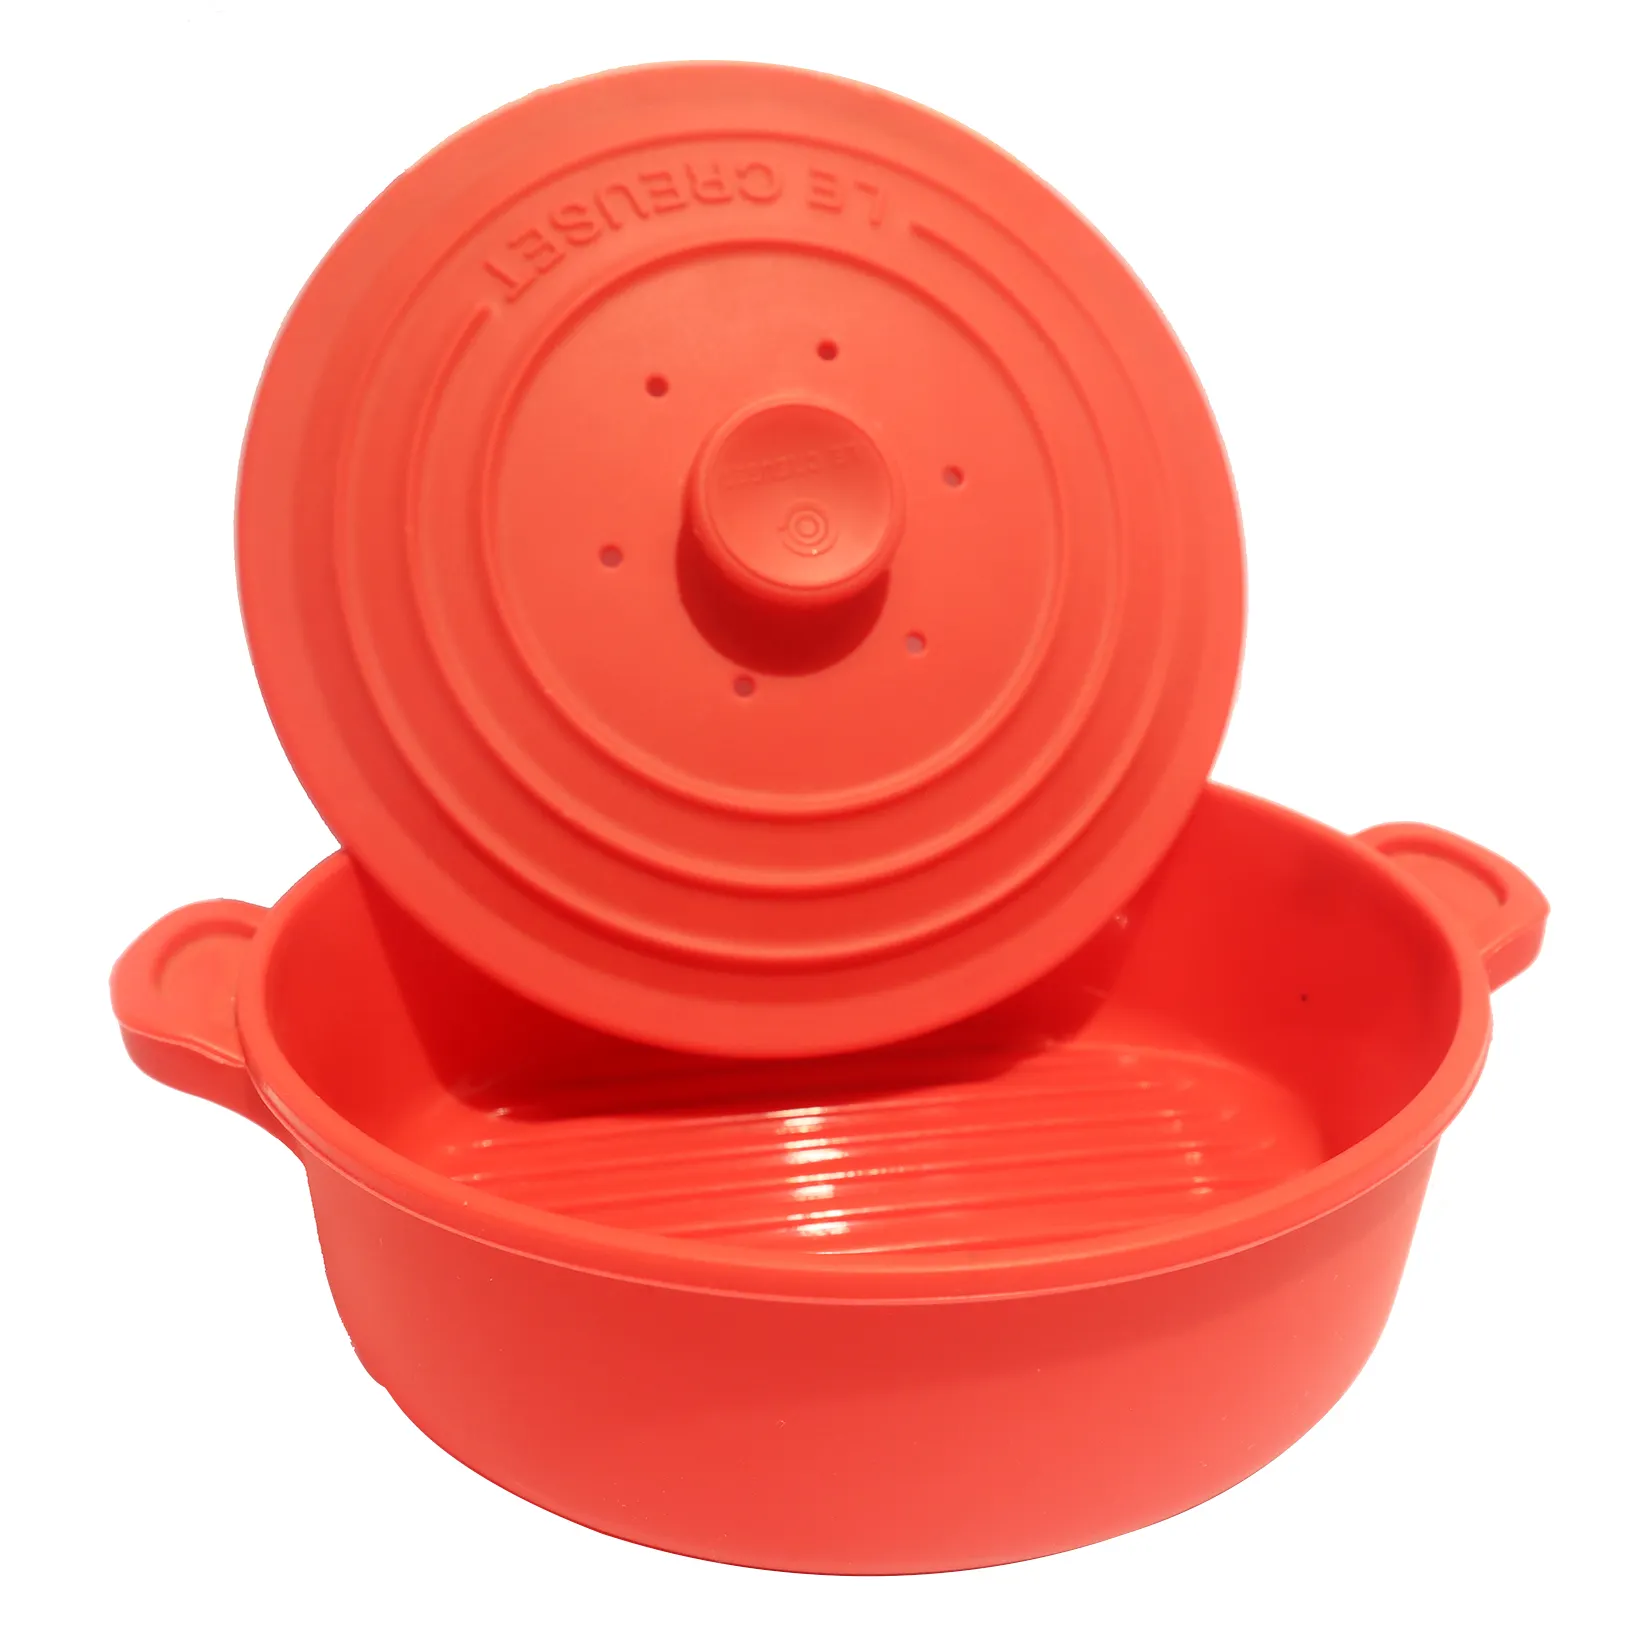 Heat Resistant Silicone Microwave Steamer With Lid Round Collapsible Silicone Steamer Pot for Cooking